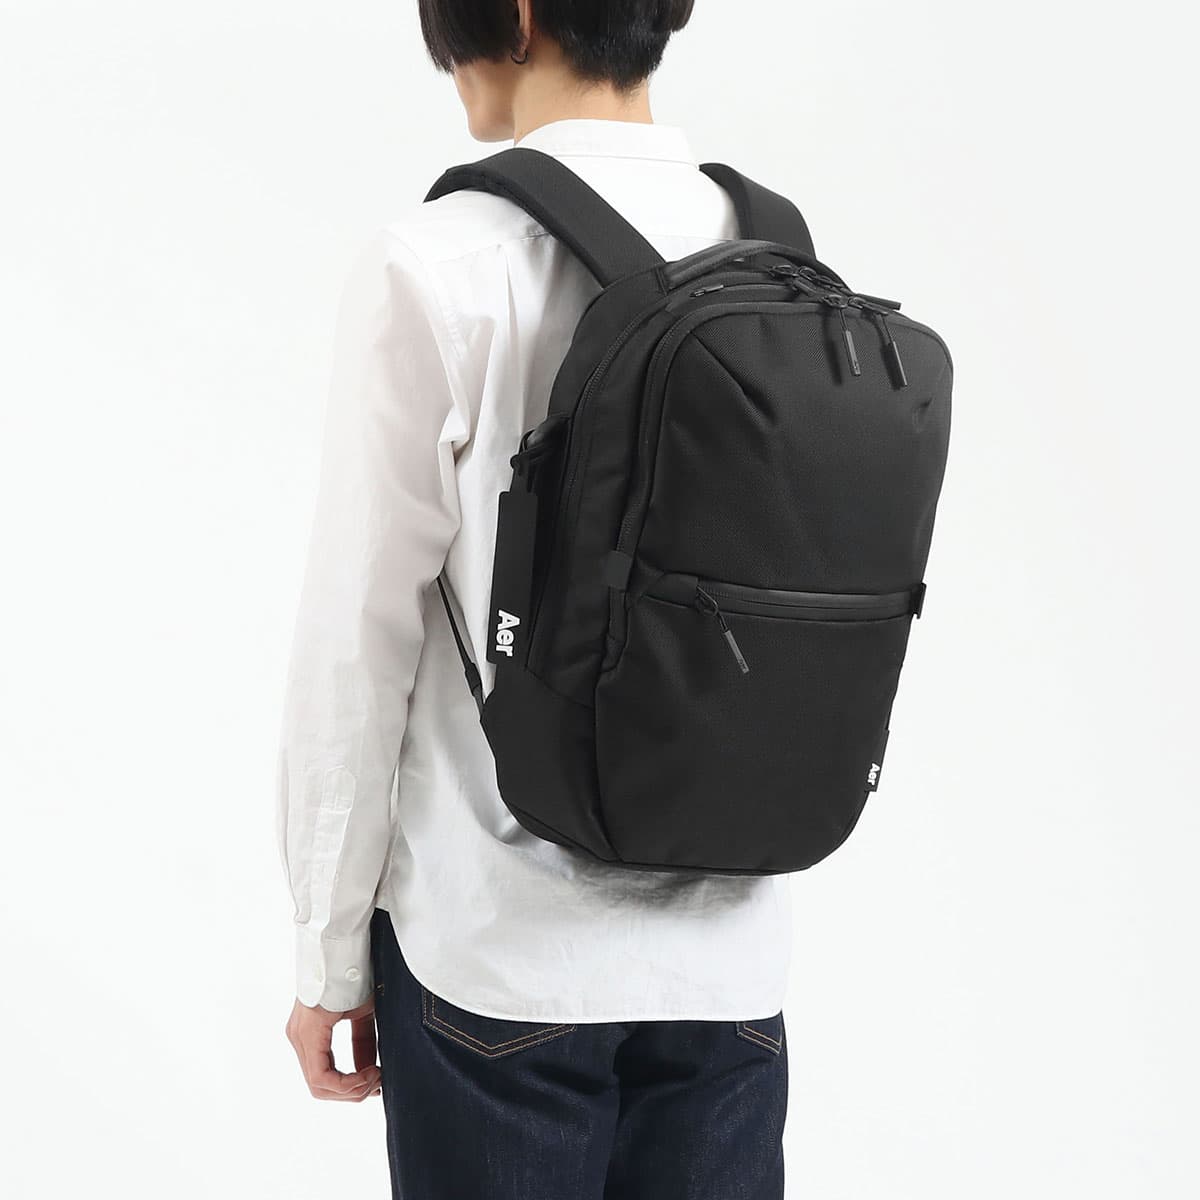 Aer エアー City Collection City Pack バックパック 14L｜【正規販売